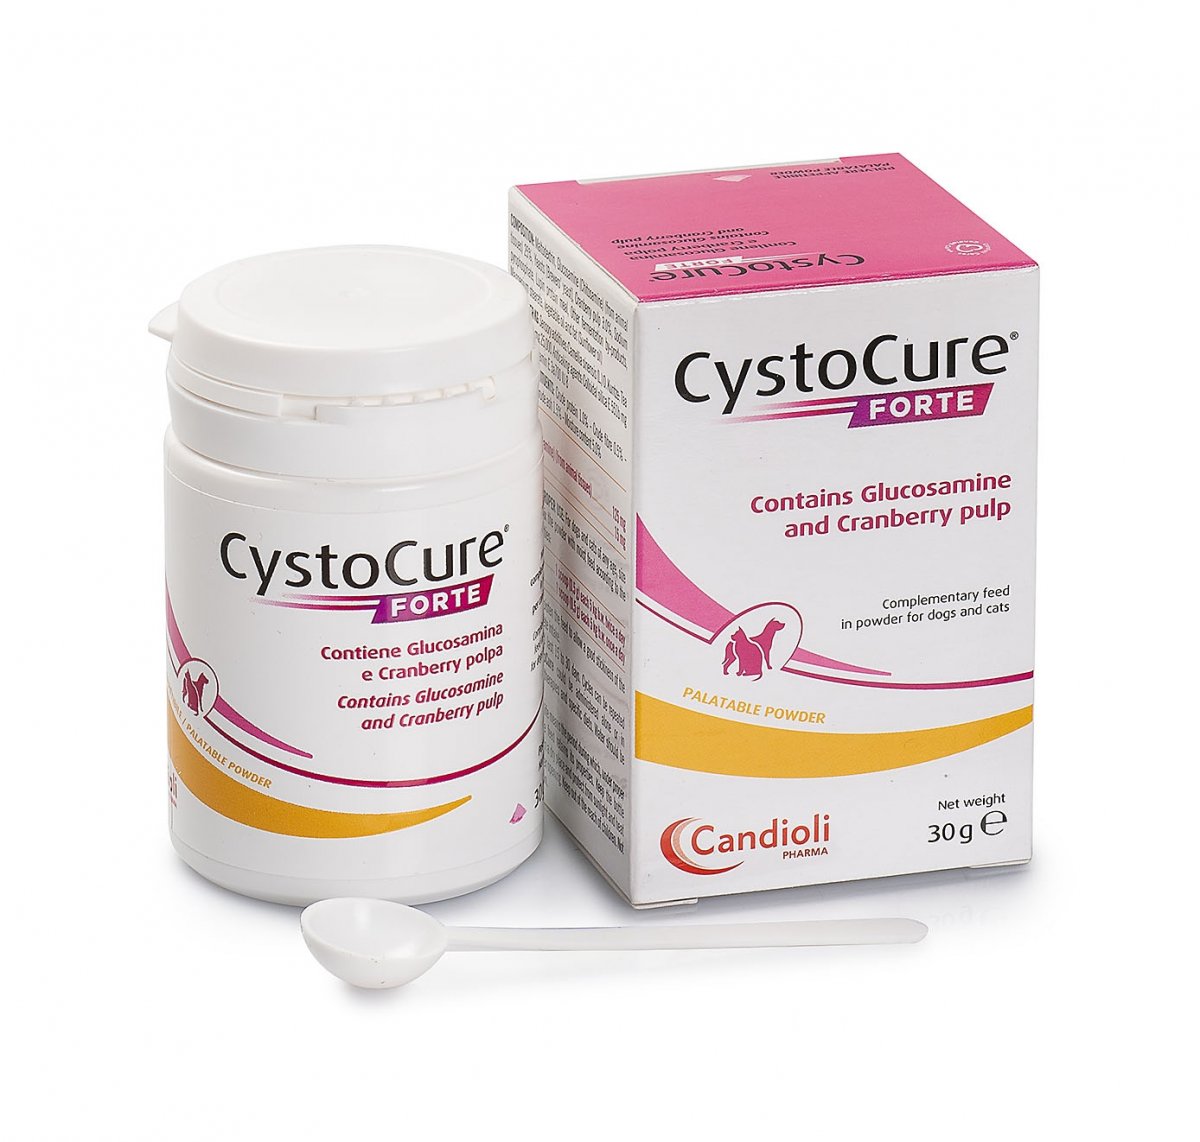 Cystocure forte powder